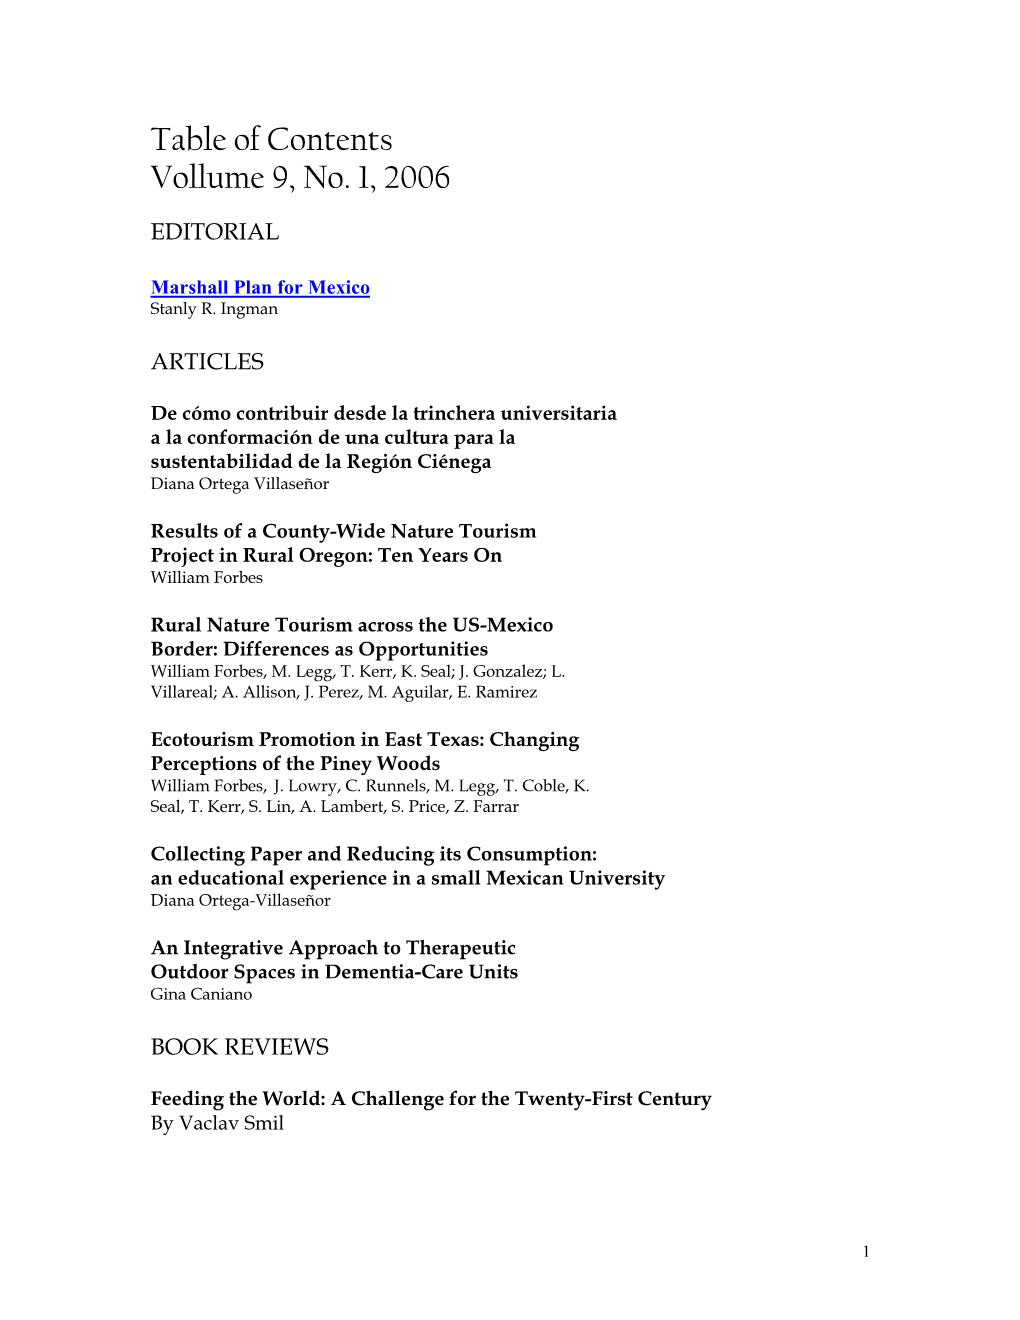 Table of Contents Vollume 9, No